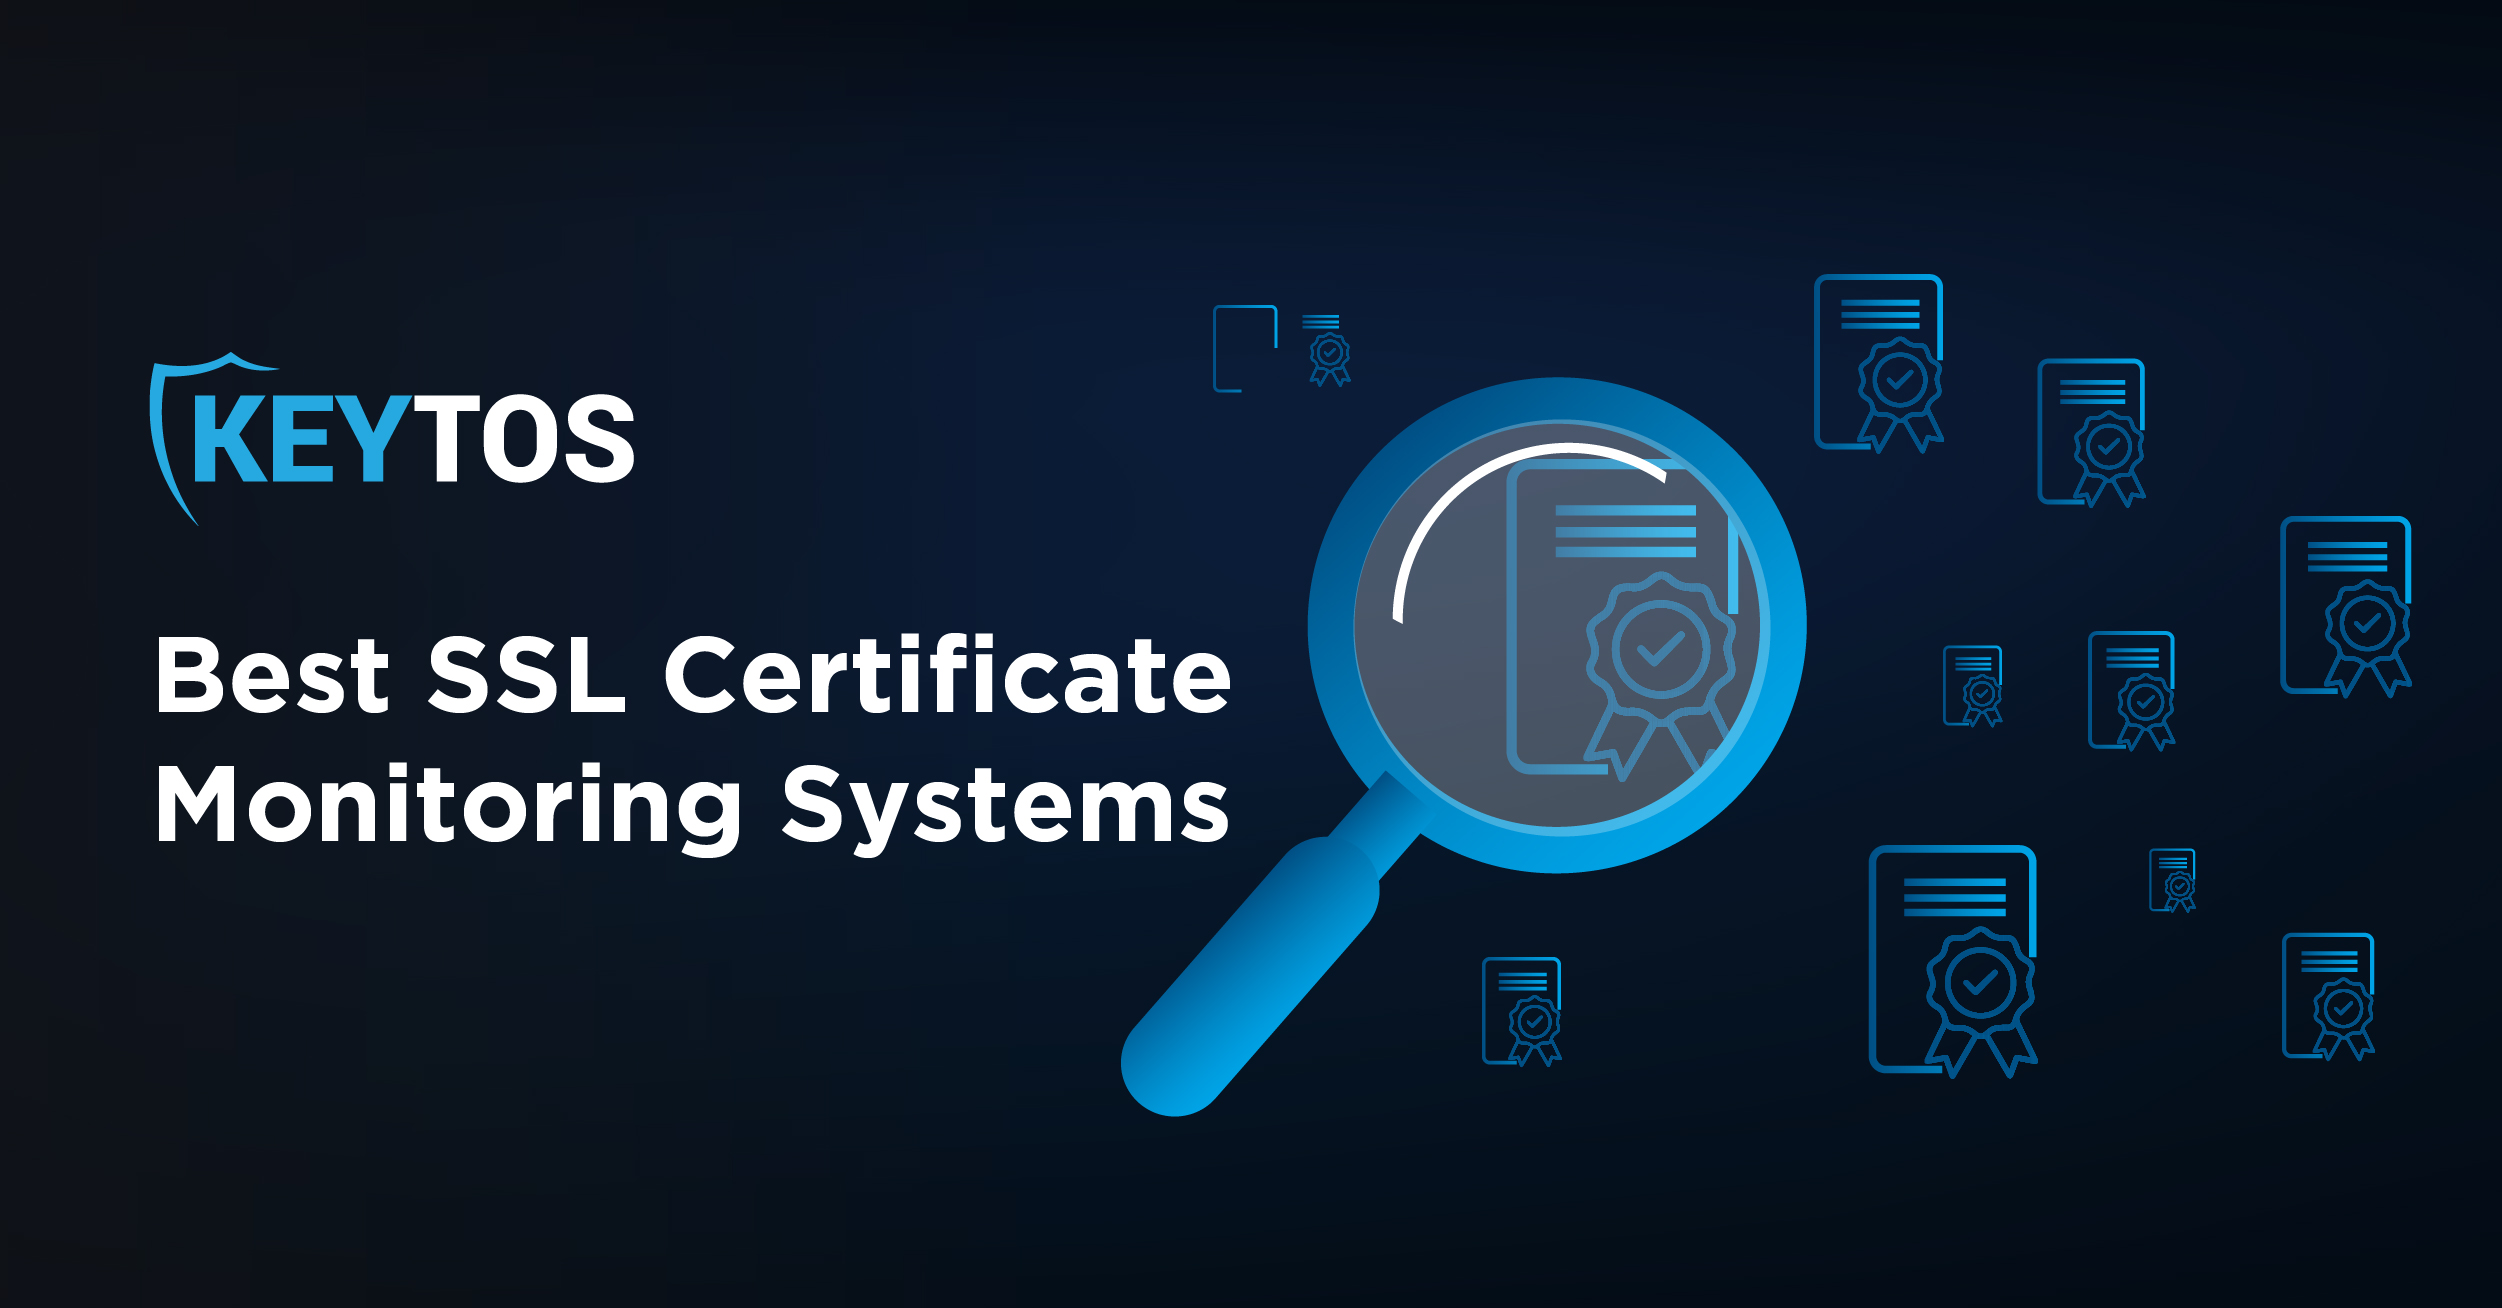 What is The Best Solution for Certificate Monitoring?